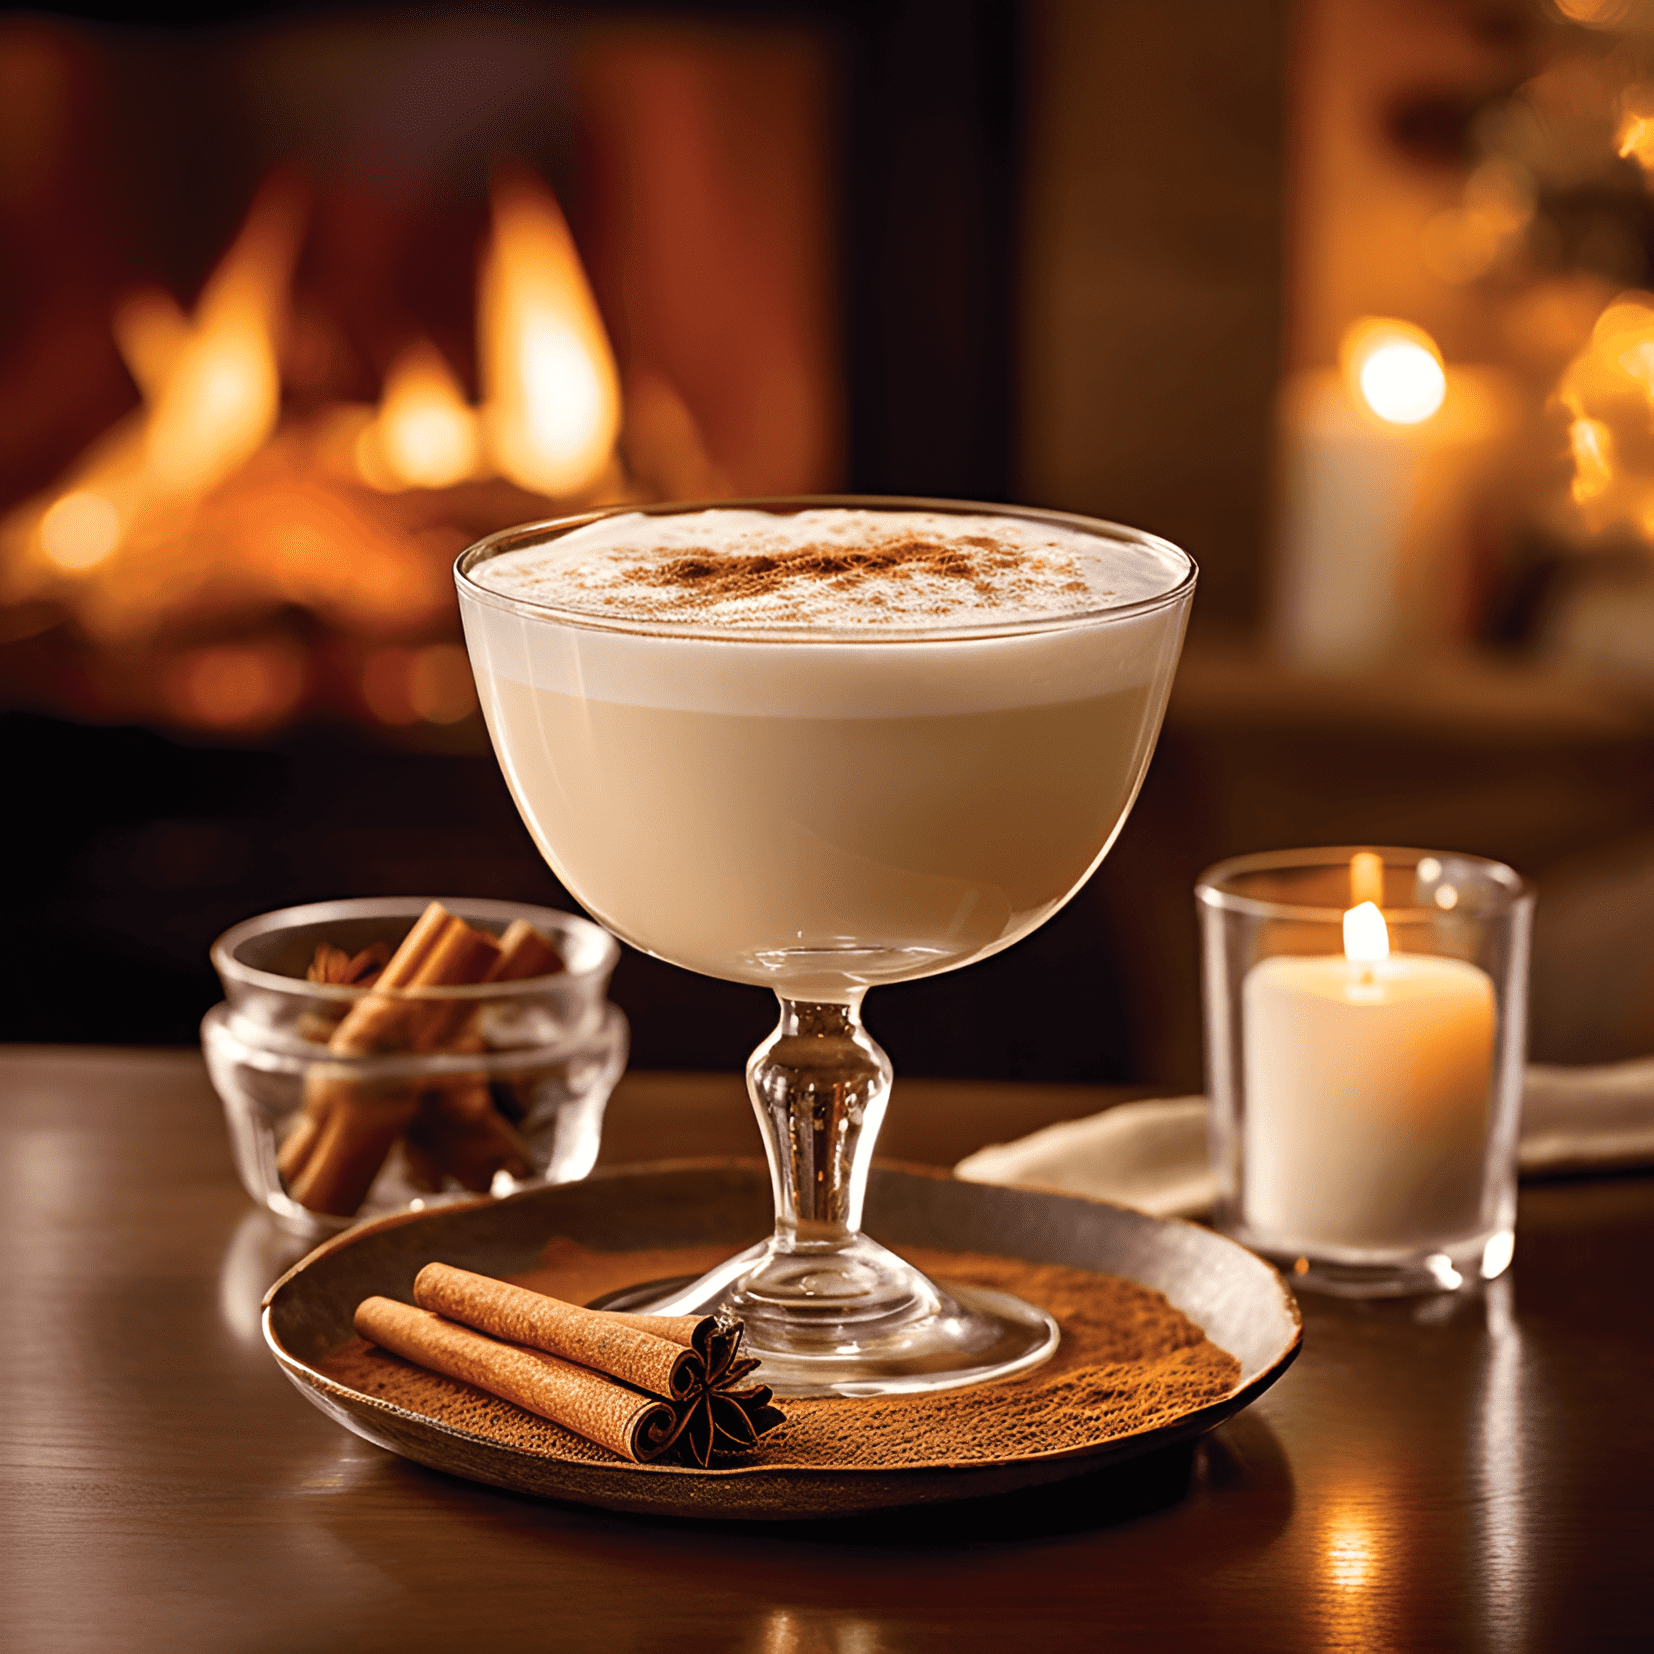 Eggnog Cocktail Recipe - Eggnog is a sweet, creamy, and rich drink with a velvety texture. It has a subtle hint of nutmeg and cinnamon, giving it a warm and comforting flavor. The drink is mildly boozy, with a smooth and gentle finish.